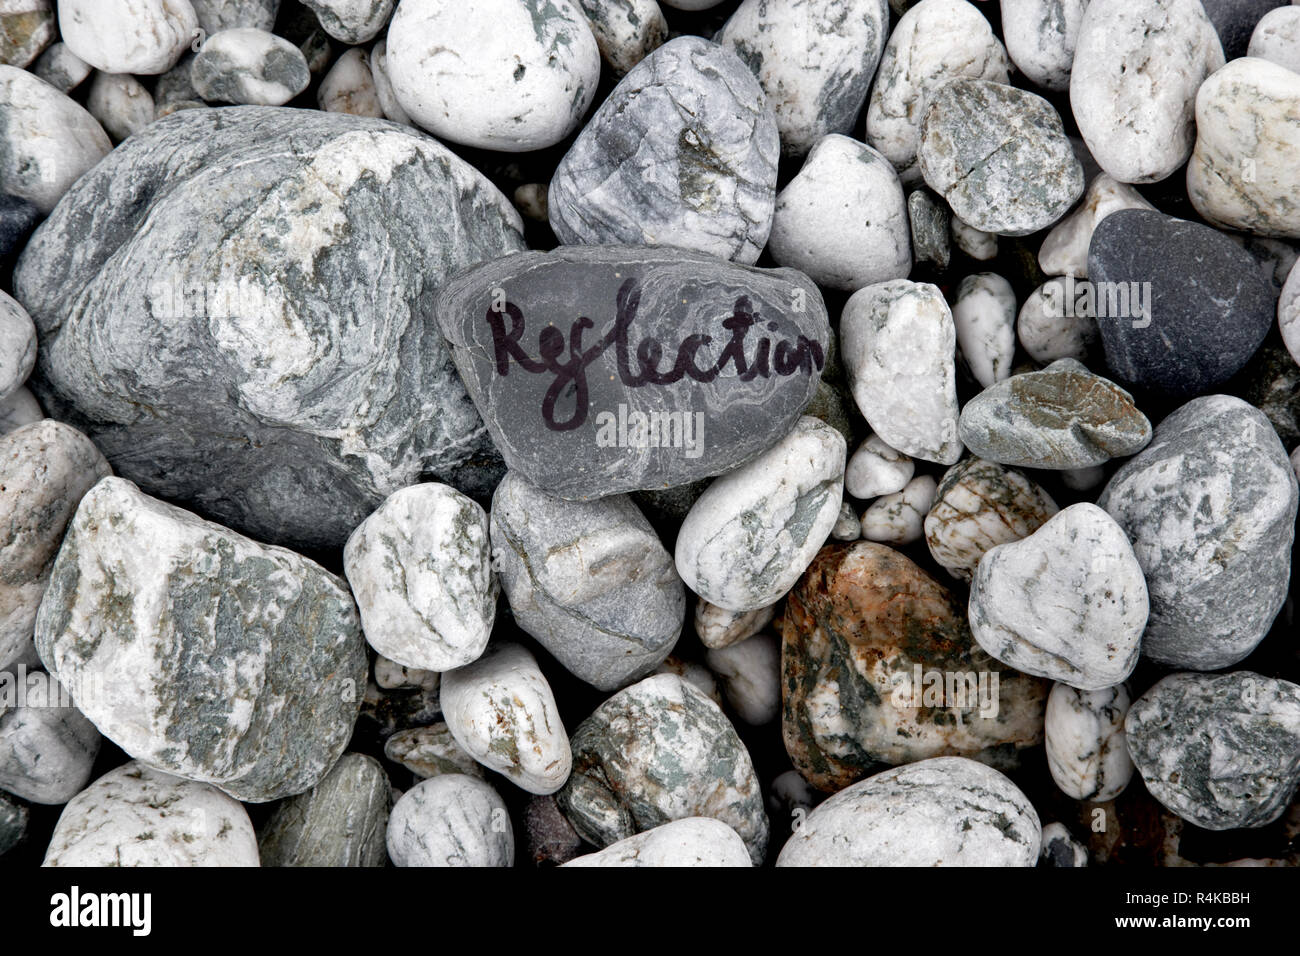 Messages on stones, Beach stones painted, Cornwall, UK. Stock Photo